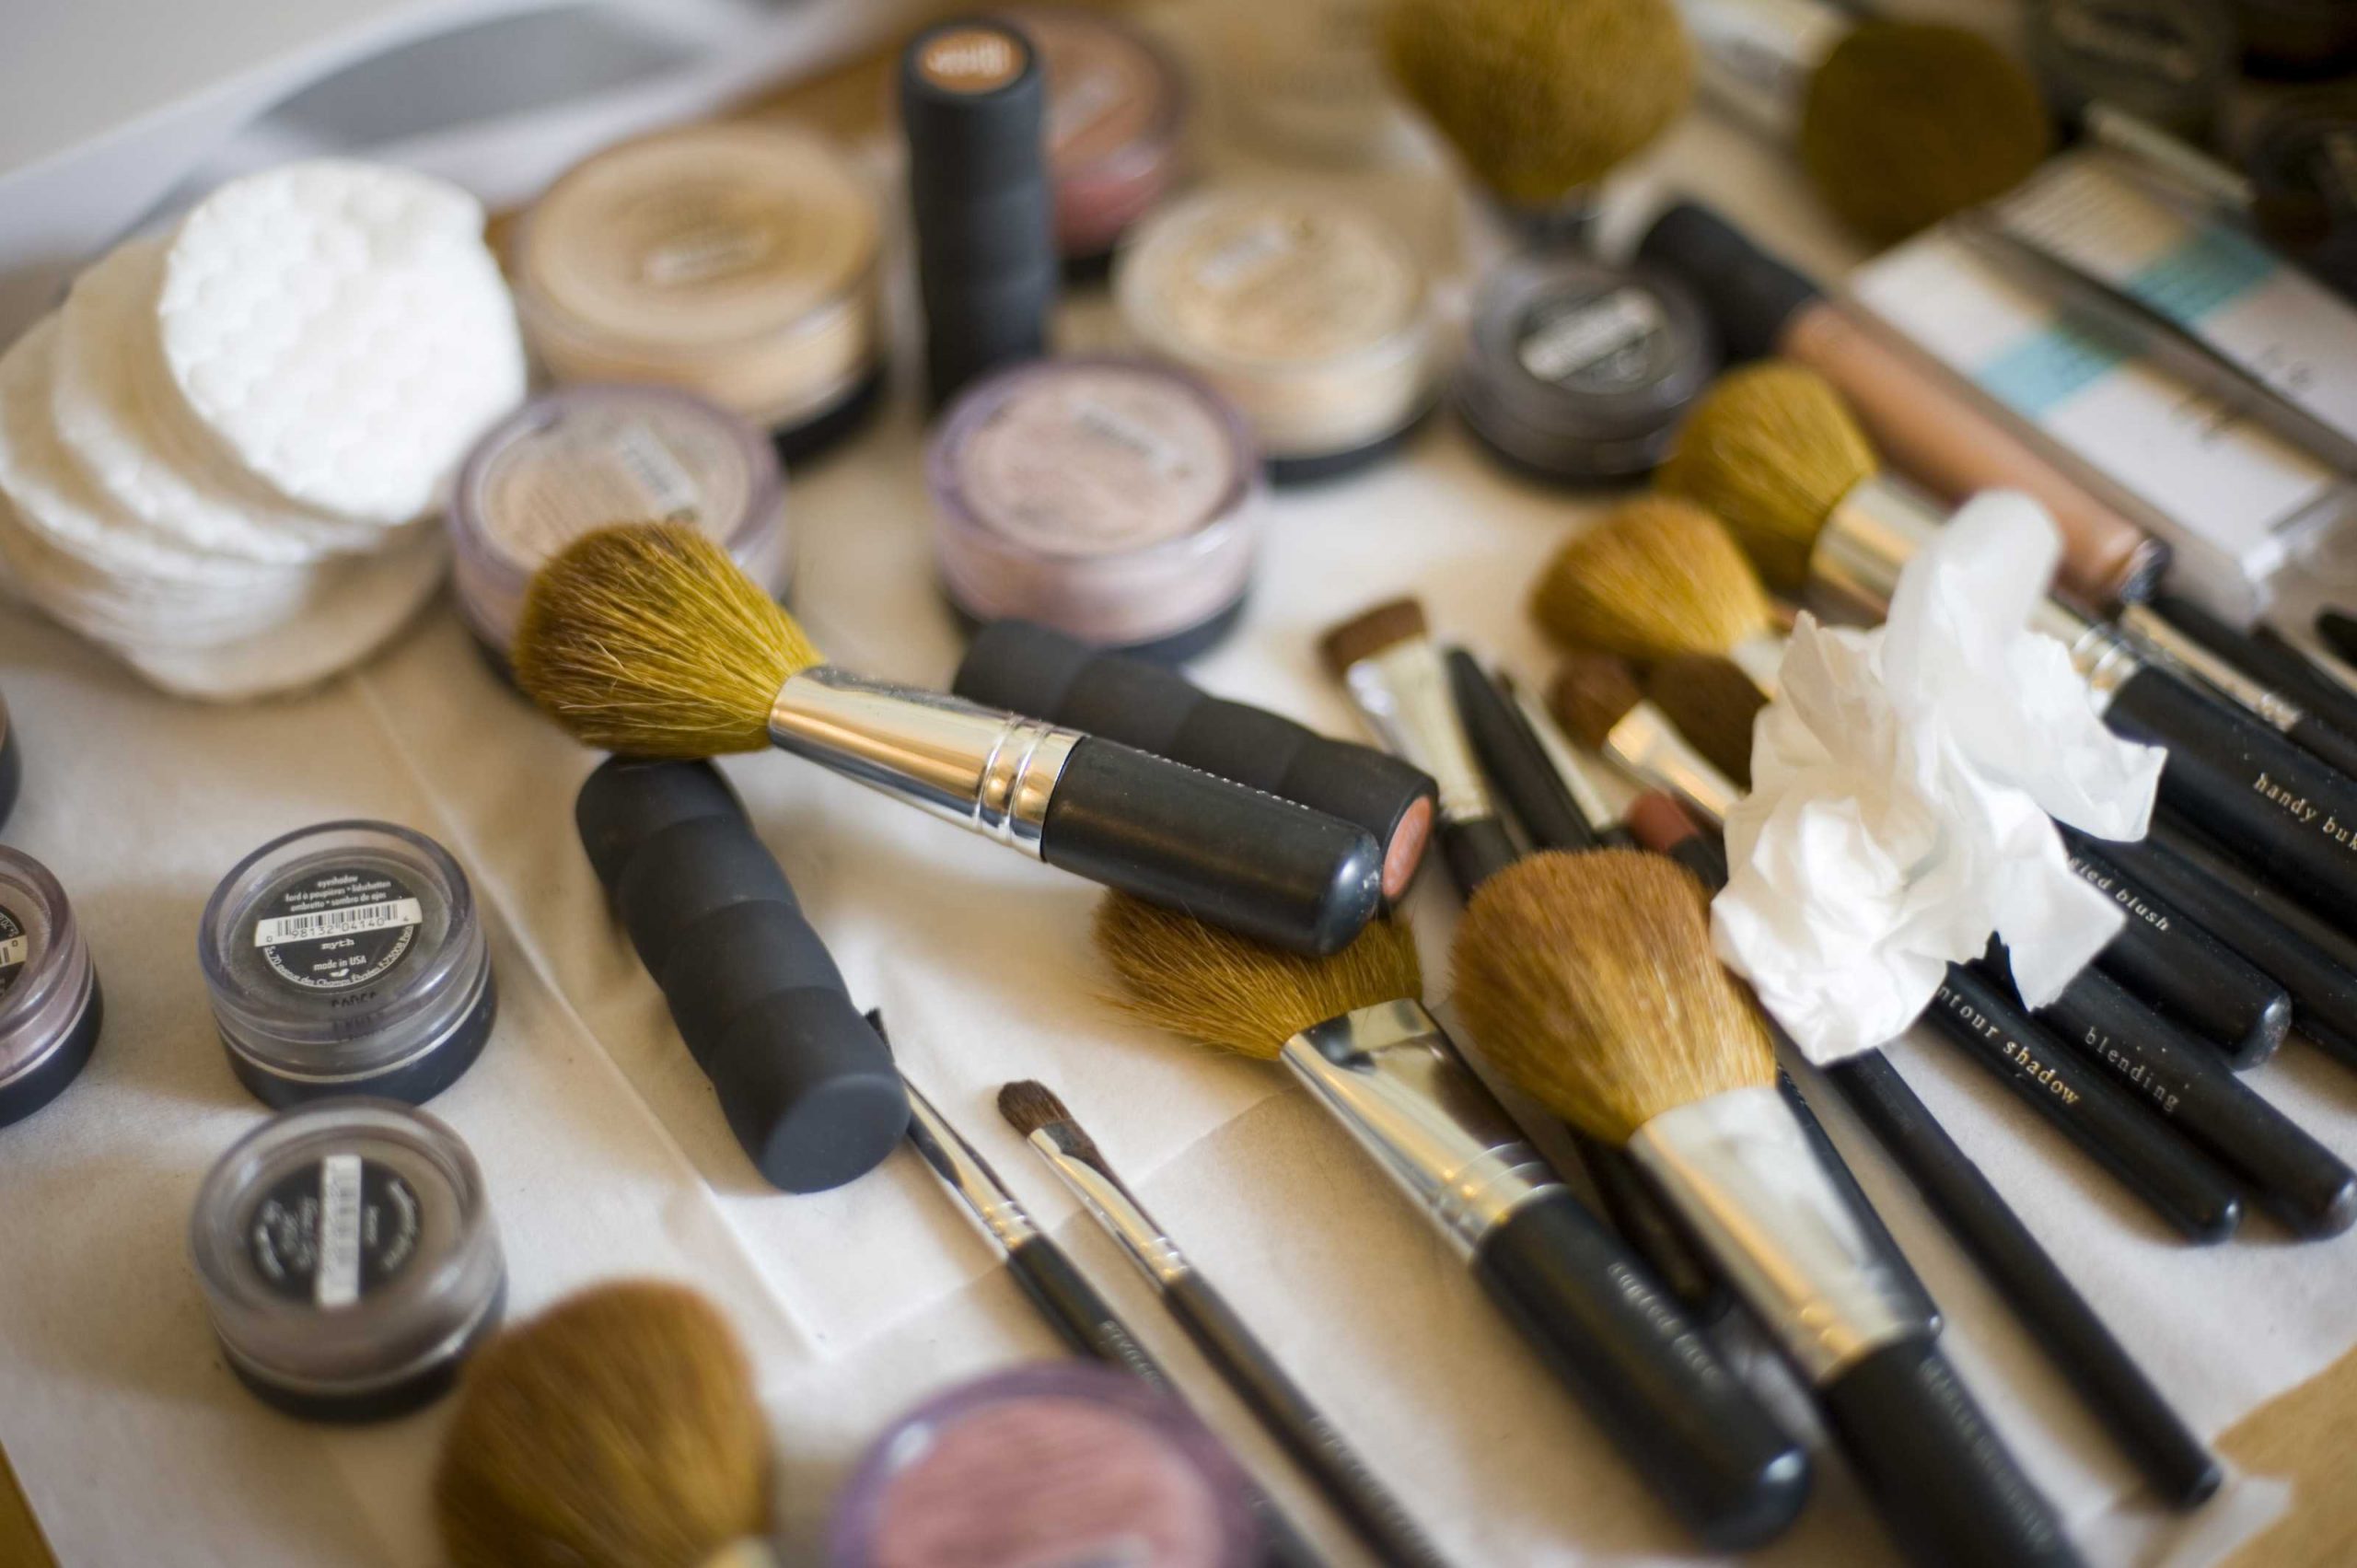 How Do You Know When to Change Your Beauty Products